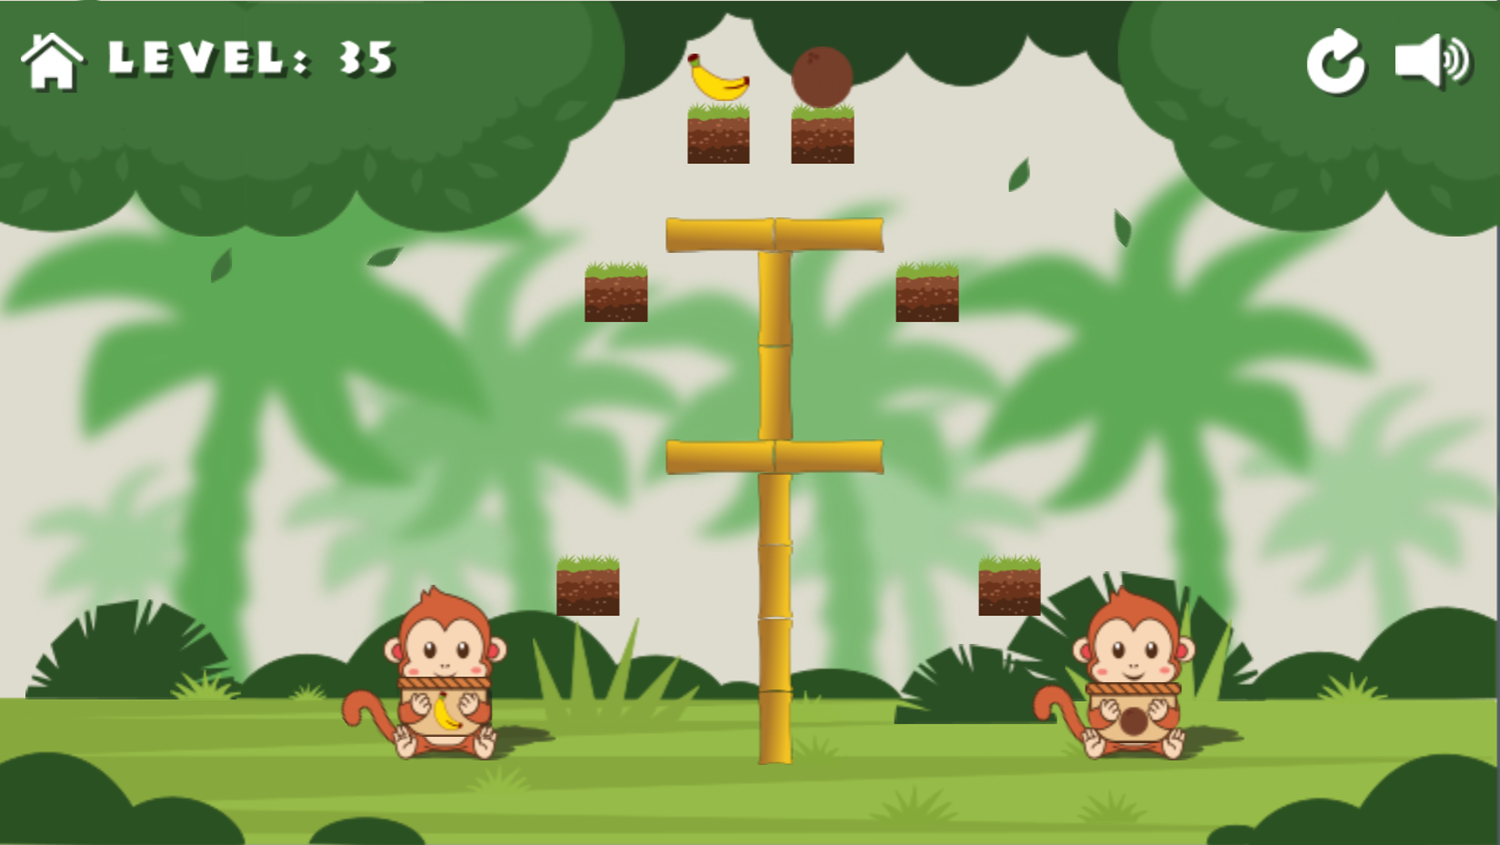 Monkeys and Fruits Game Level With Tall Bamboo Screenshot.